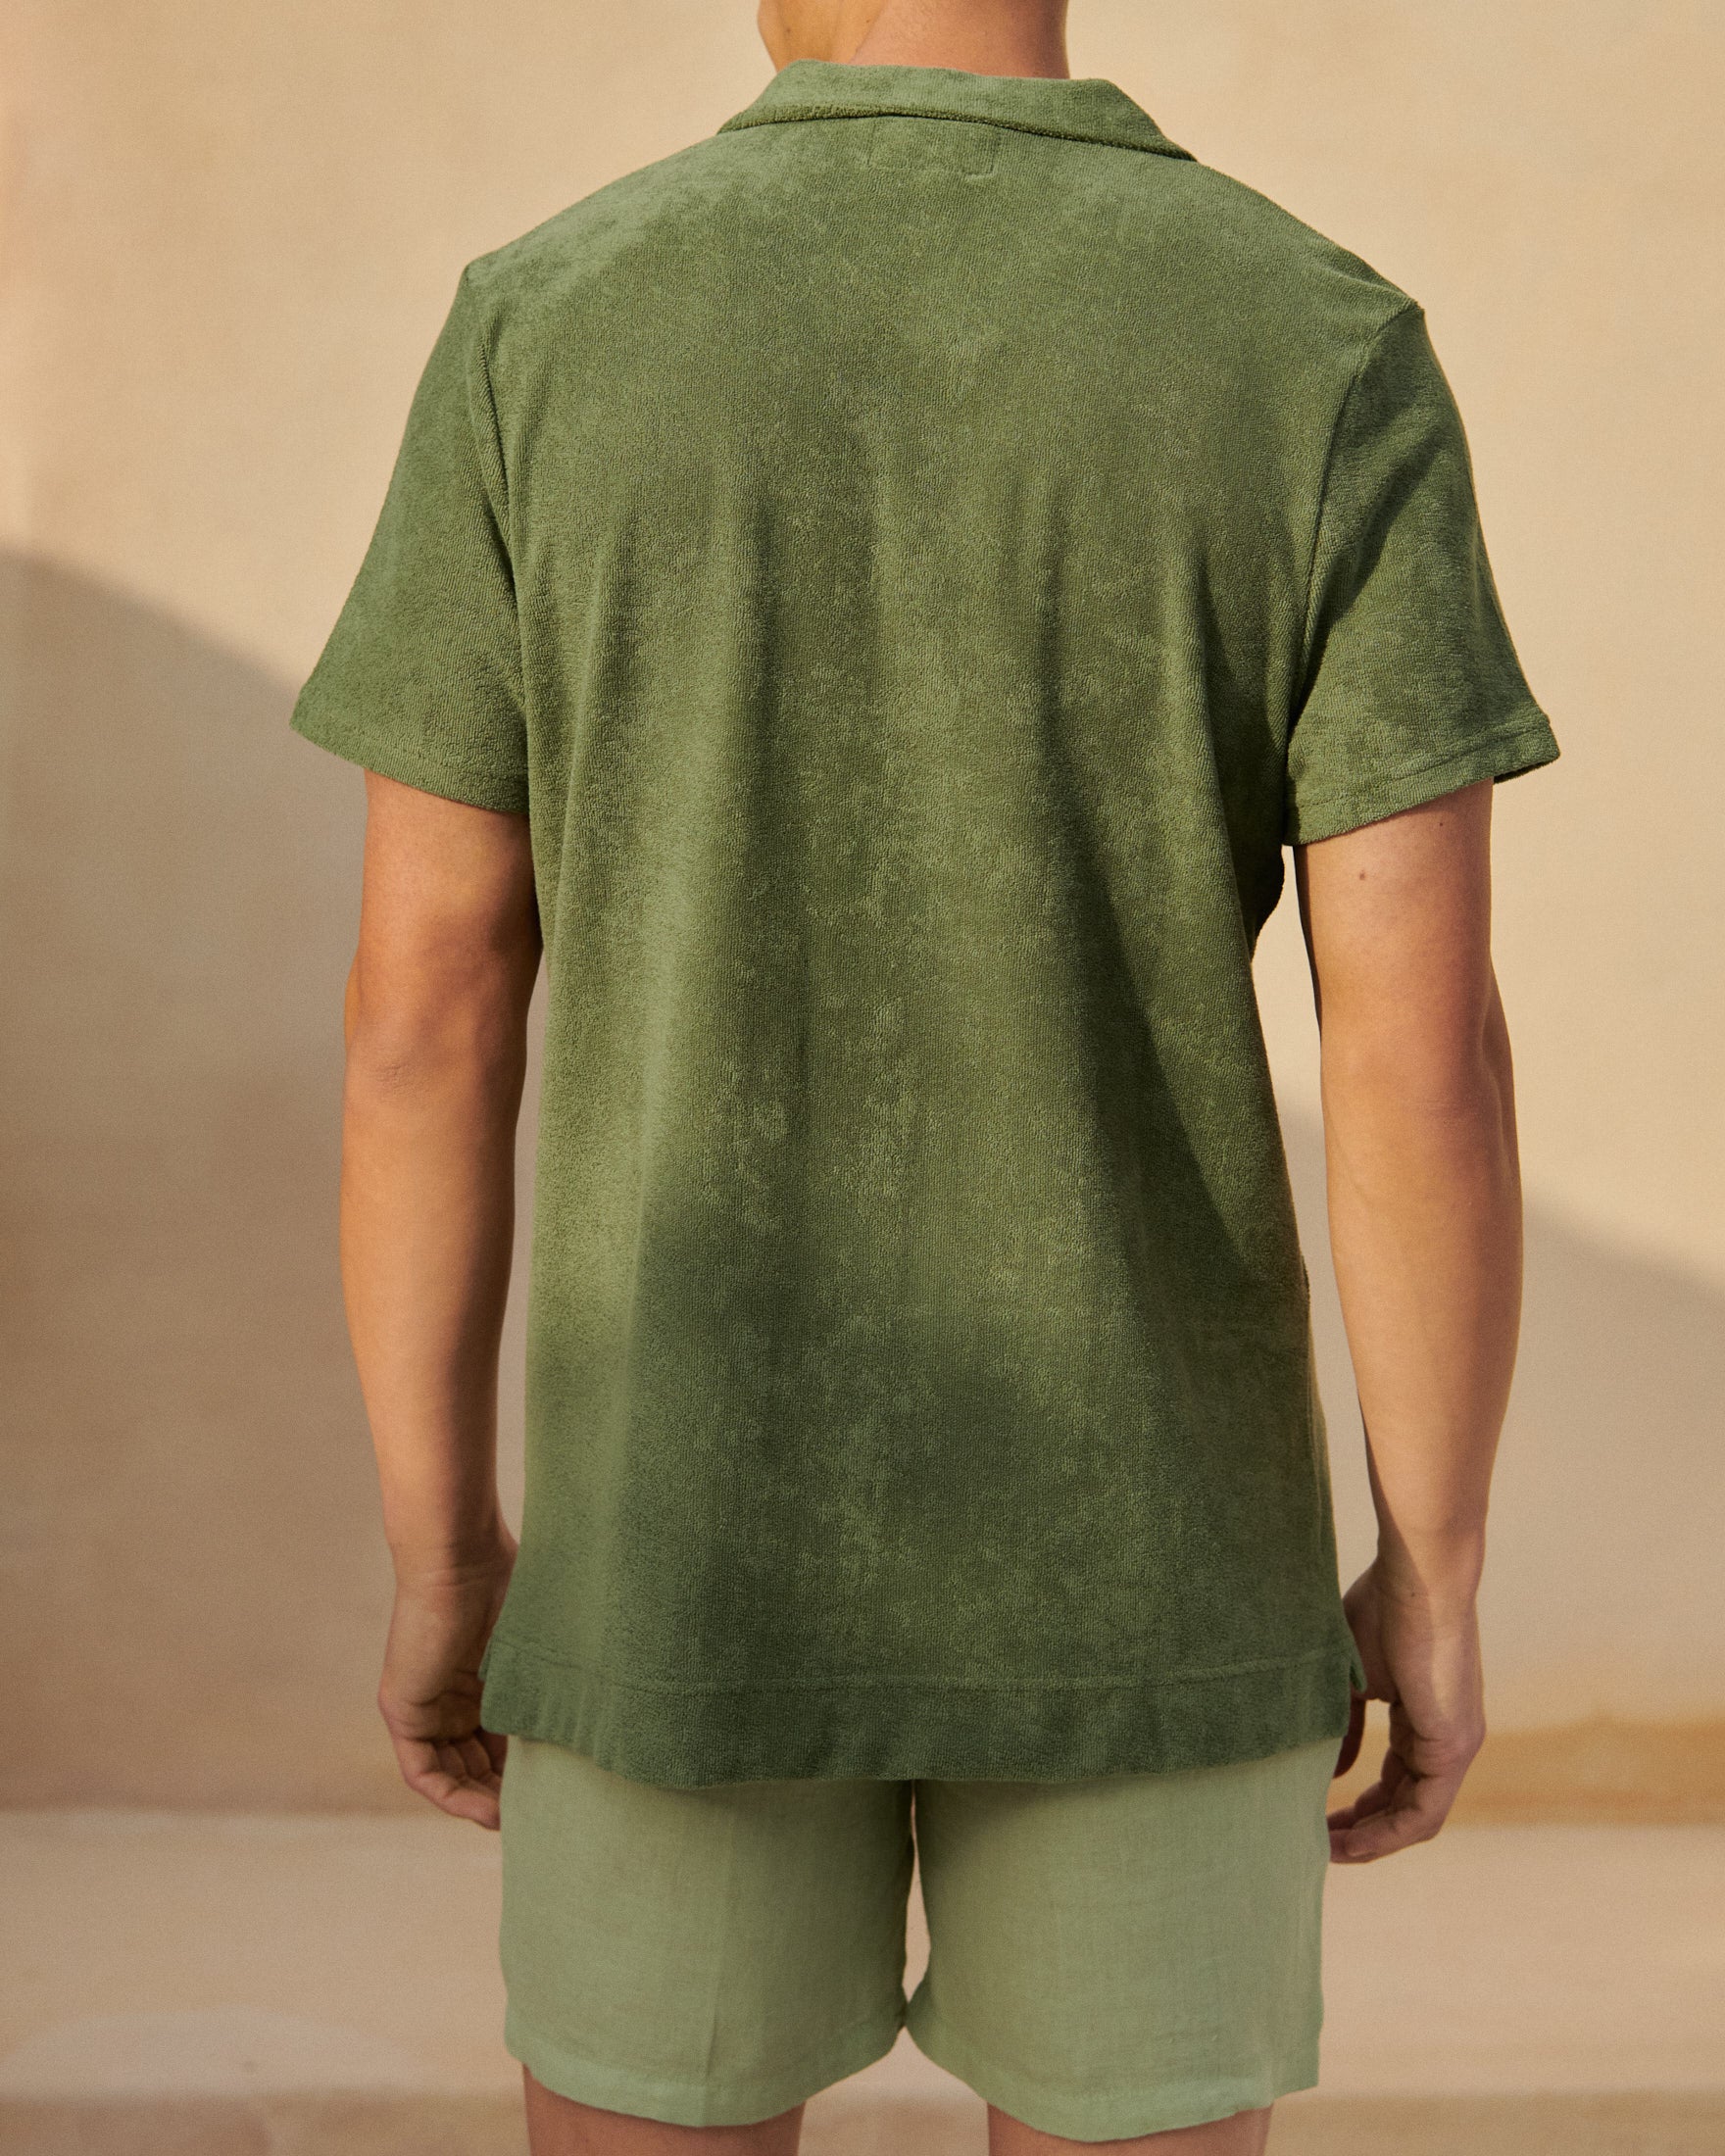 Olive Polo Shirt  - Made in Portugal - Kaki Terry Cotton